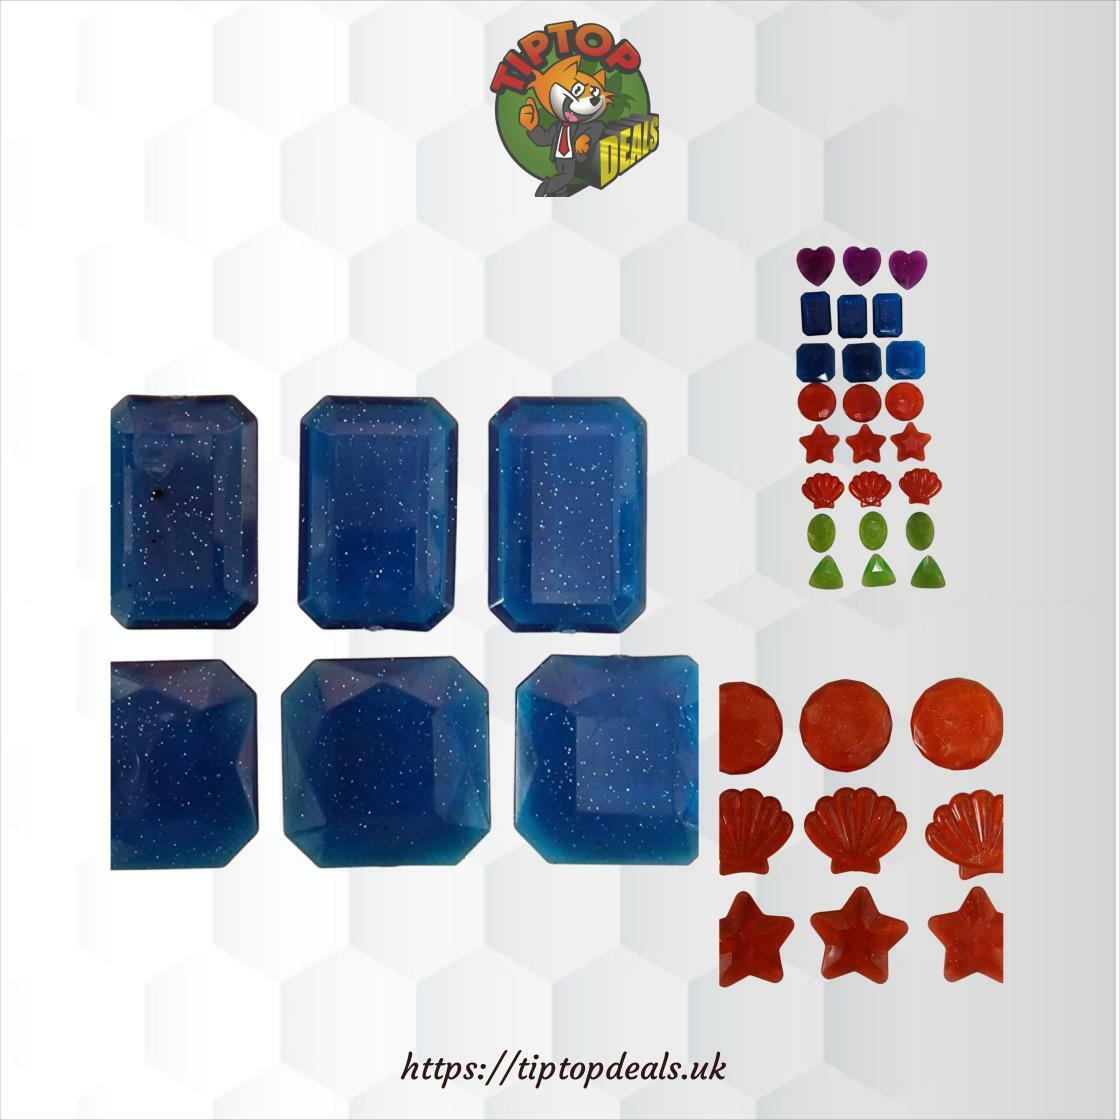 In stock. Going soon. 24 Piece Swimming Pool Colourful Acrylic Gemstones For Kids only at £15.99.. 
tiptopdeals.uk/products/24-pi…
#GreatDeals #TipTopDeals